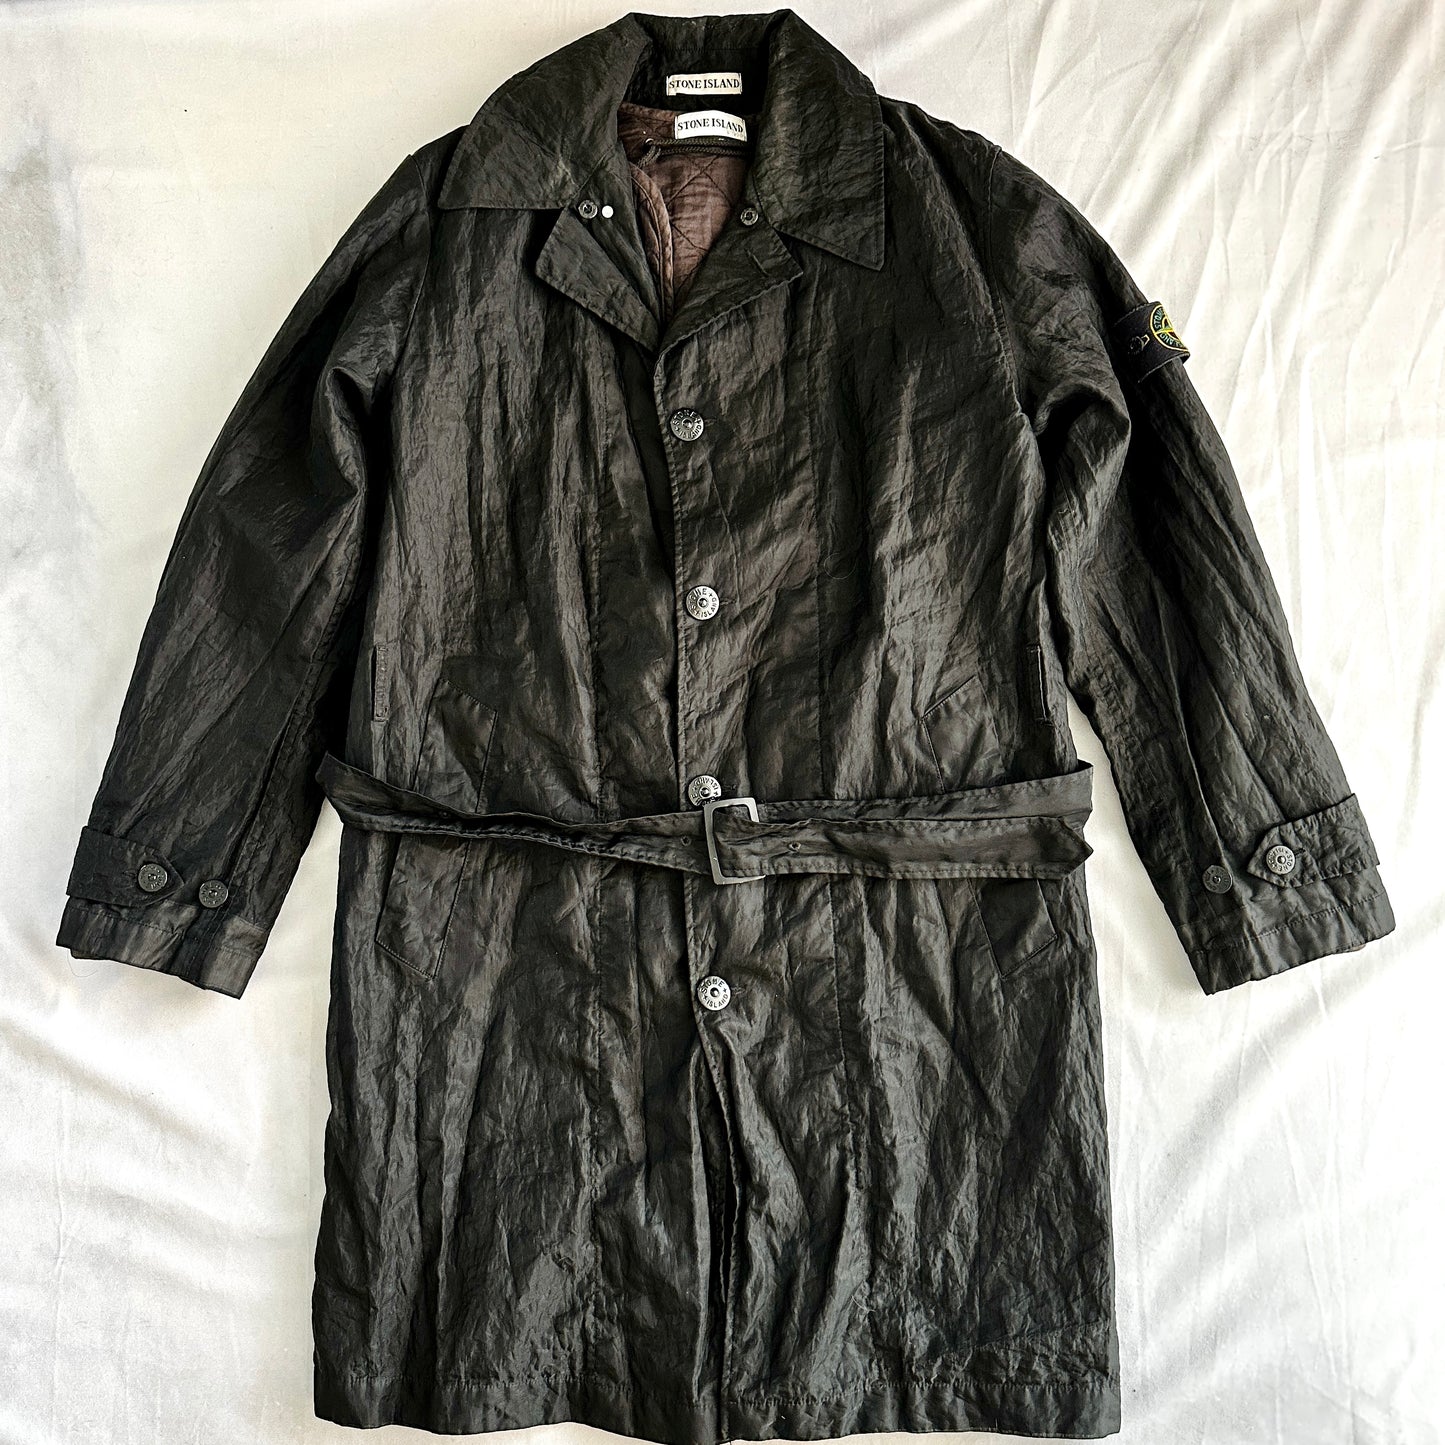 Stone Island 2002 Monofilament Coat w/ Liner - M - Made in Italy